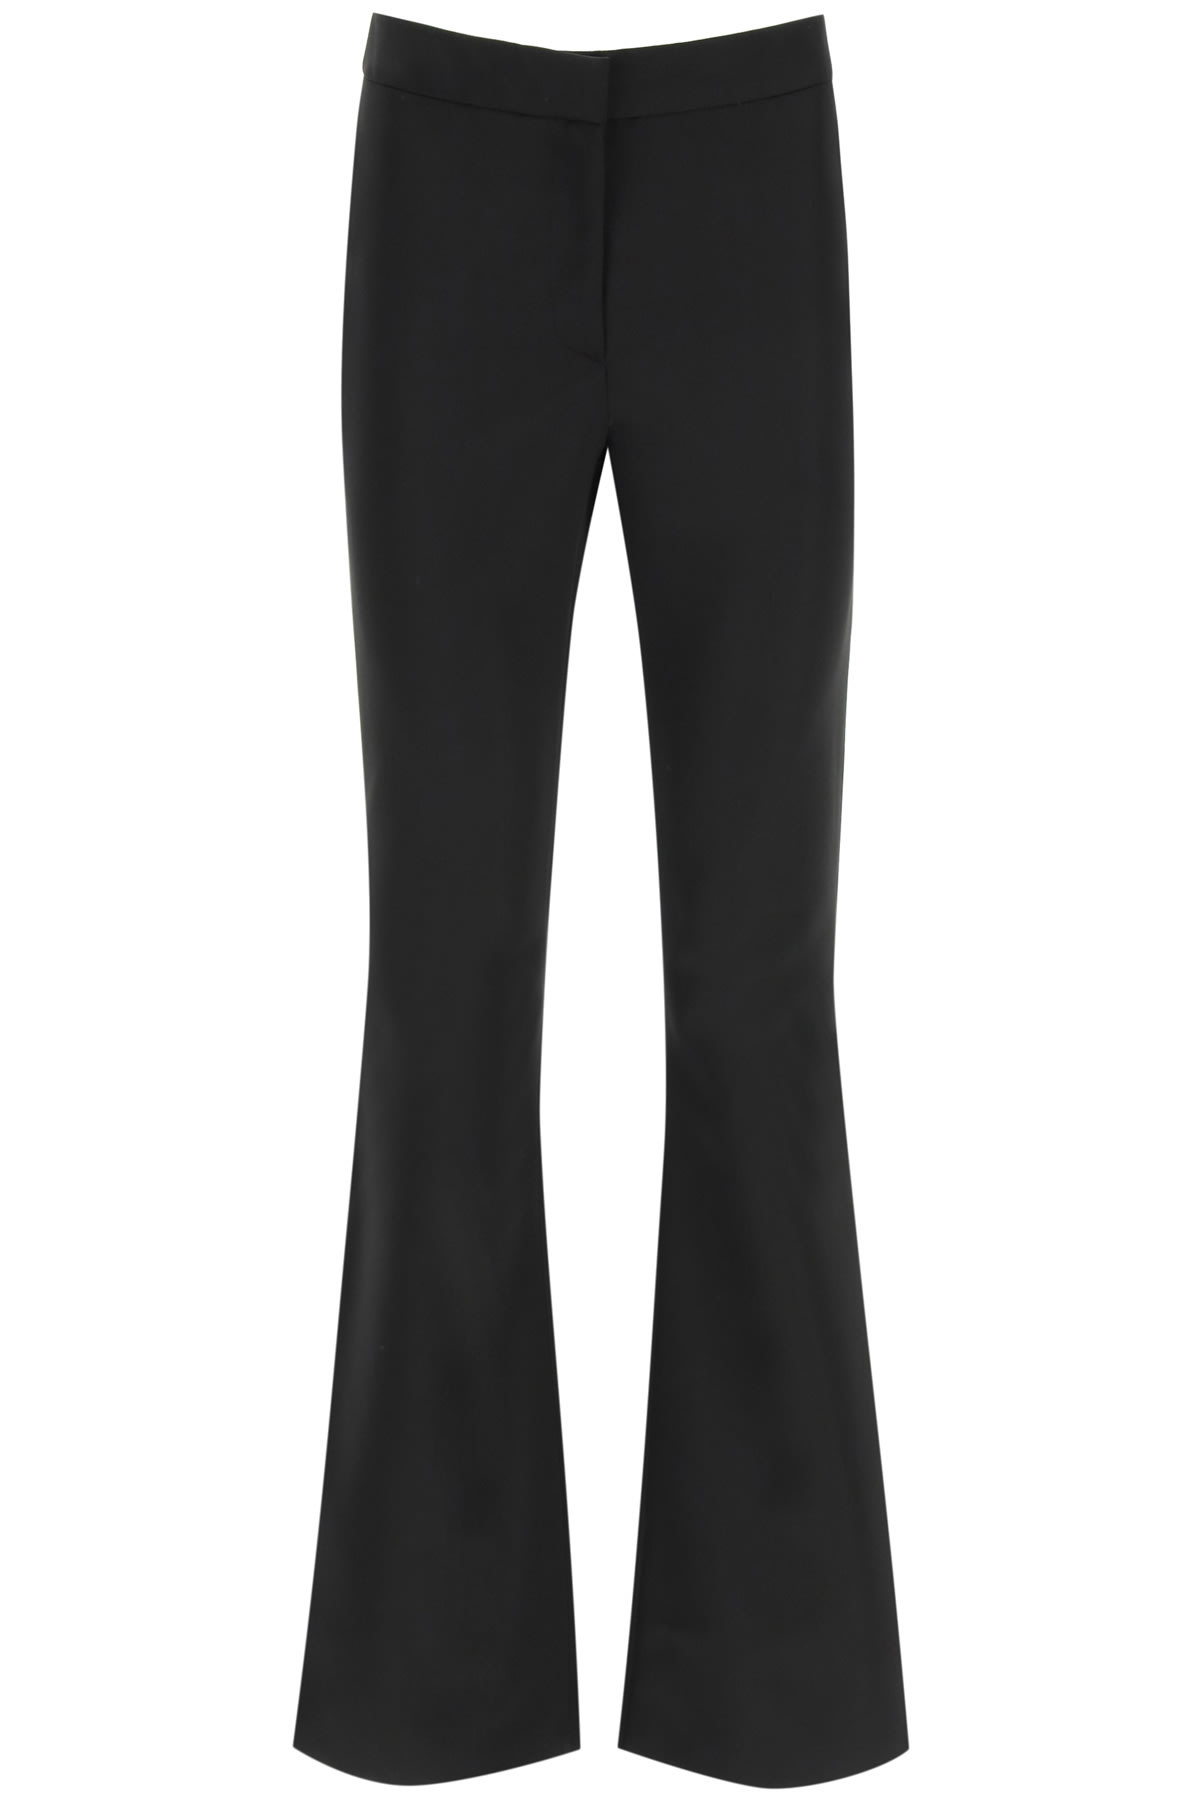 Moschino Flared Satin Trousers